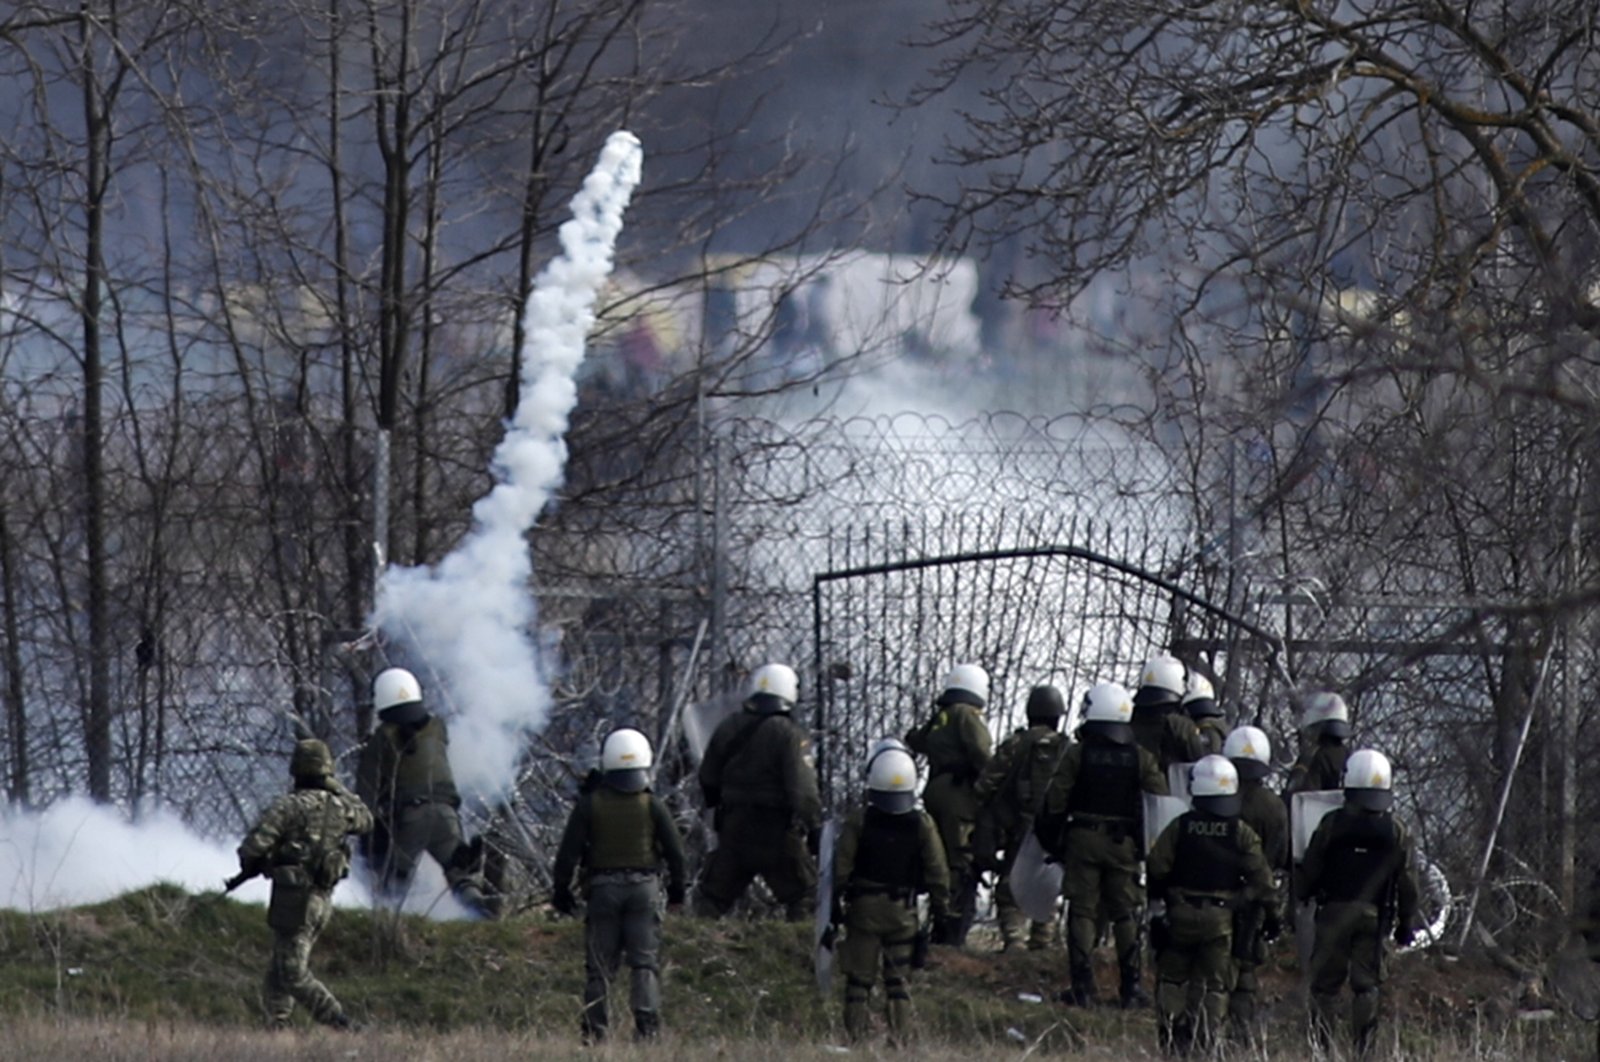 Greek police guard as migrants gather at a border fence on the Turkish side, during clashes at the Greek-Turkish border in Kastanies, Evros region, Saturday, March 7, 2020. (AP)